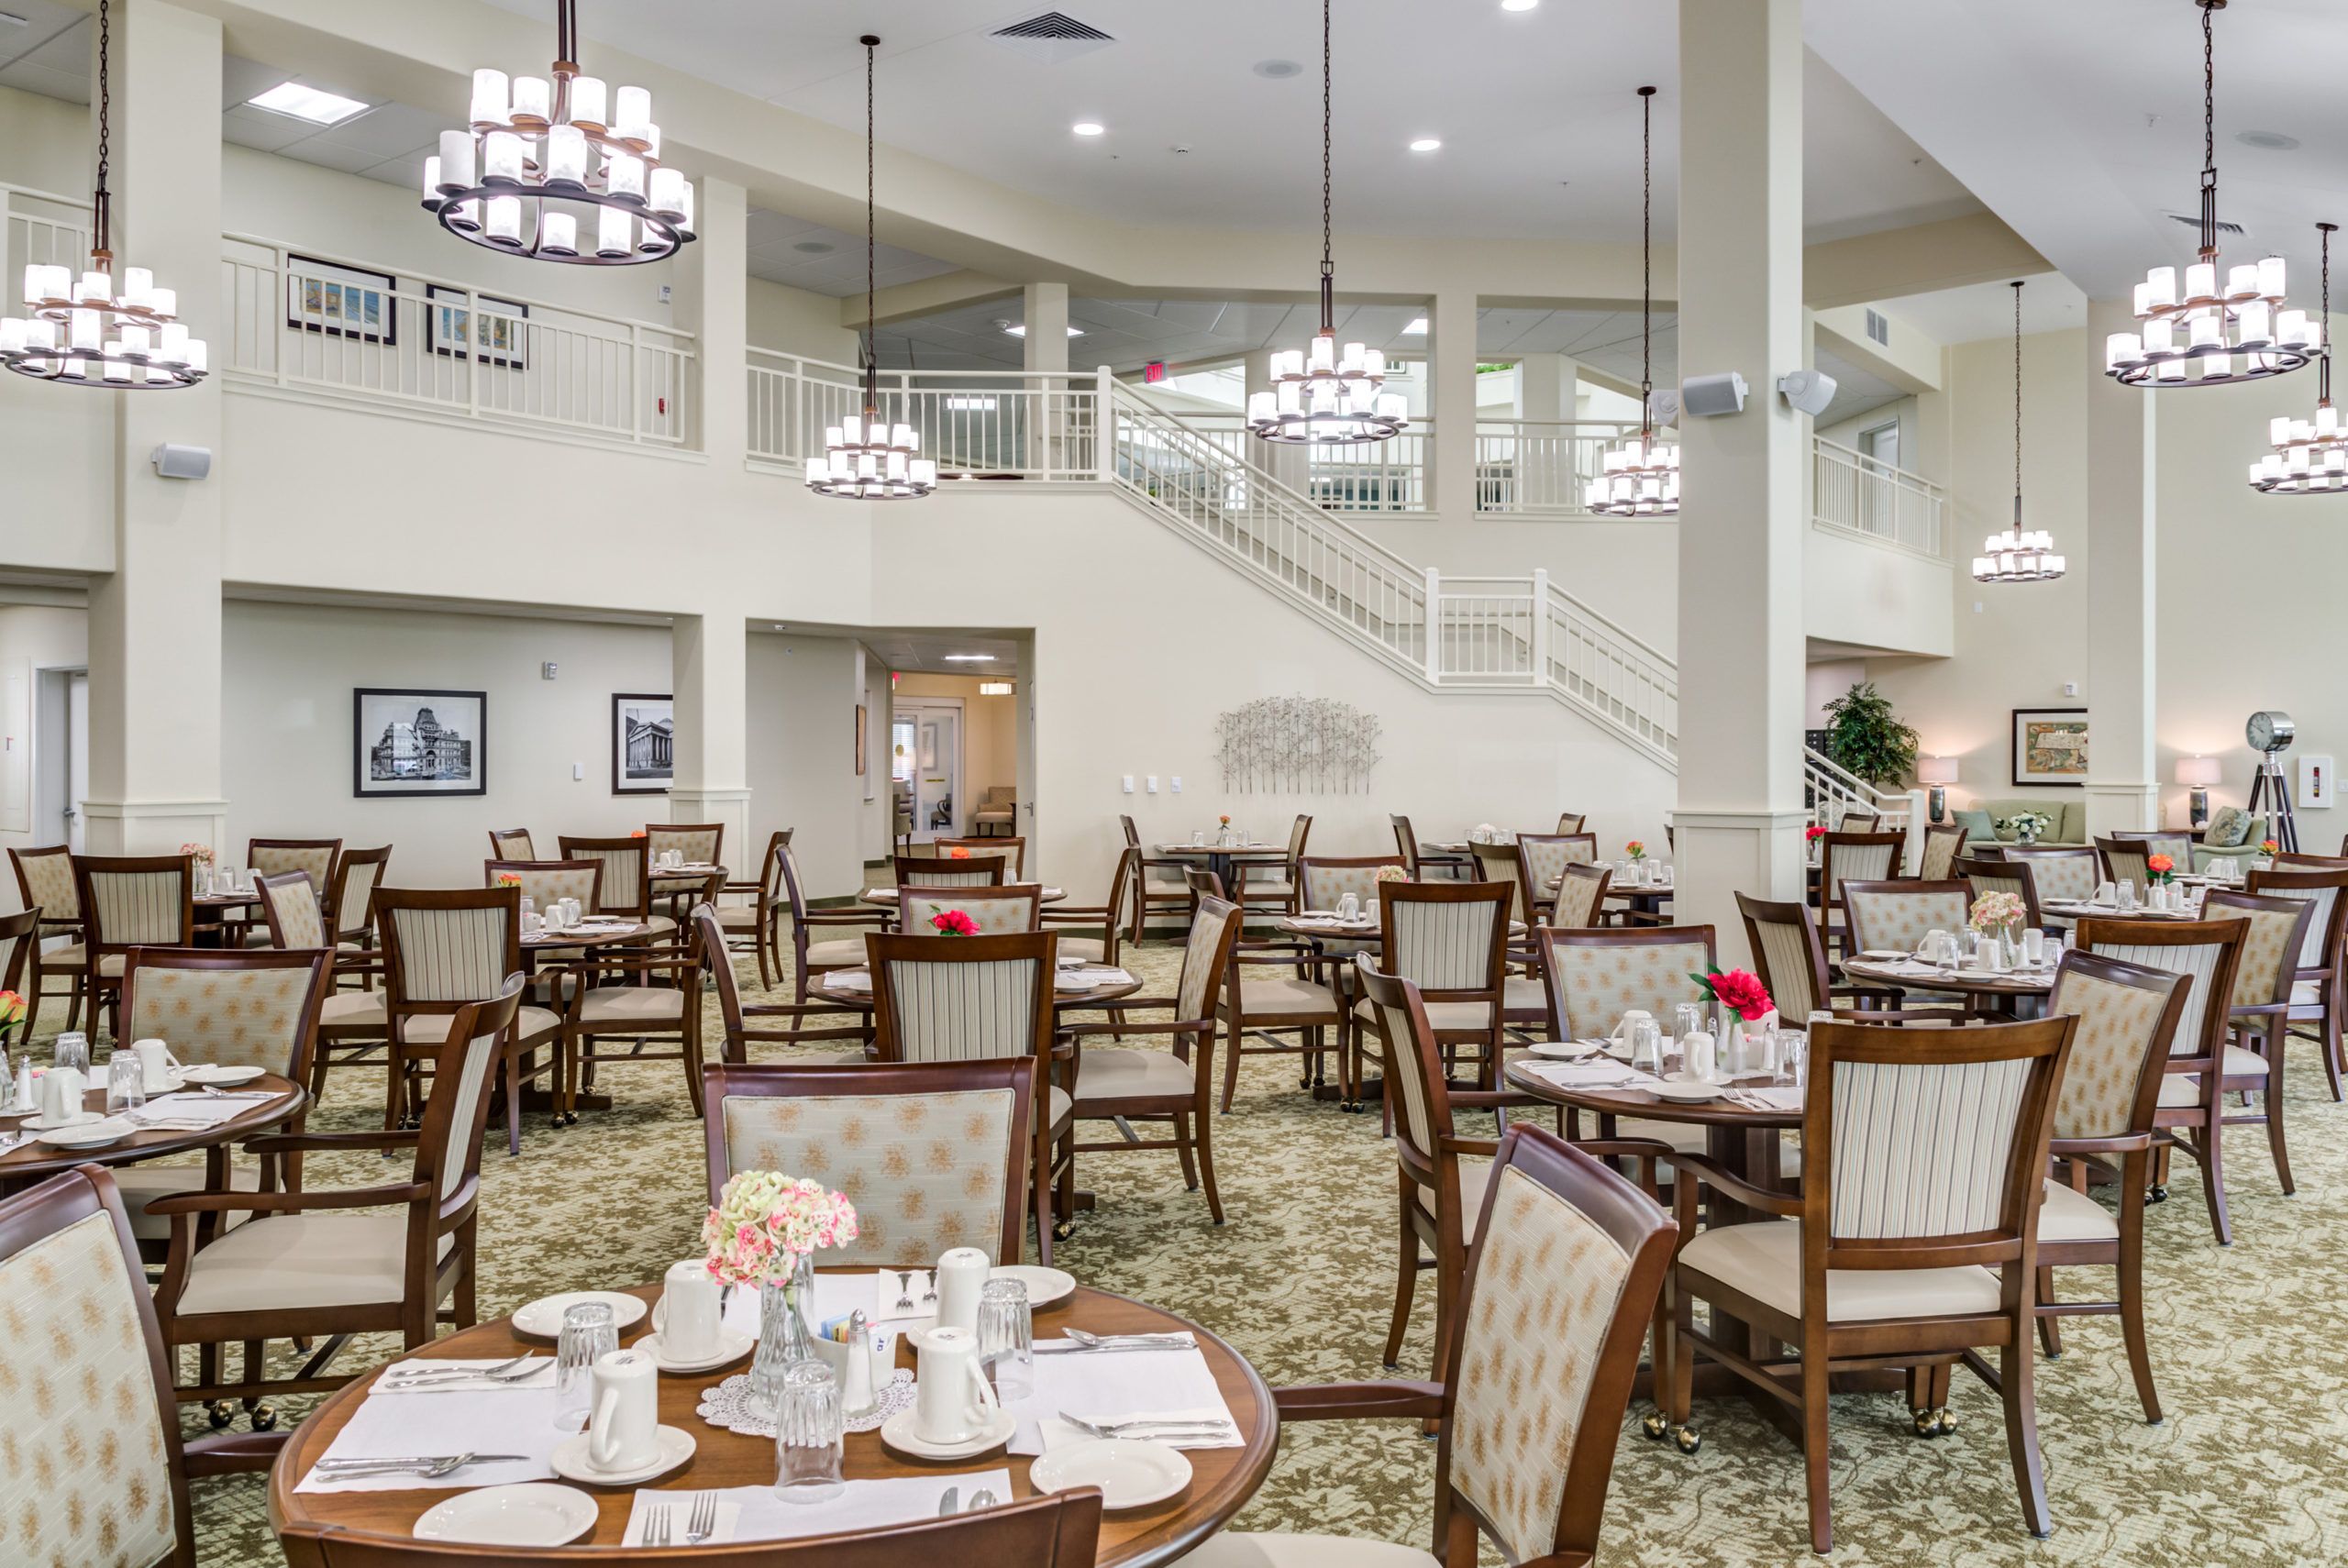 Seniors enjoying a meal in the elegant dining room at Camellia Gardens Gracious Retirement Living.